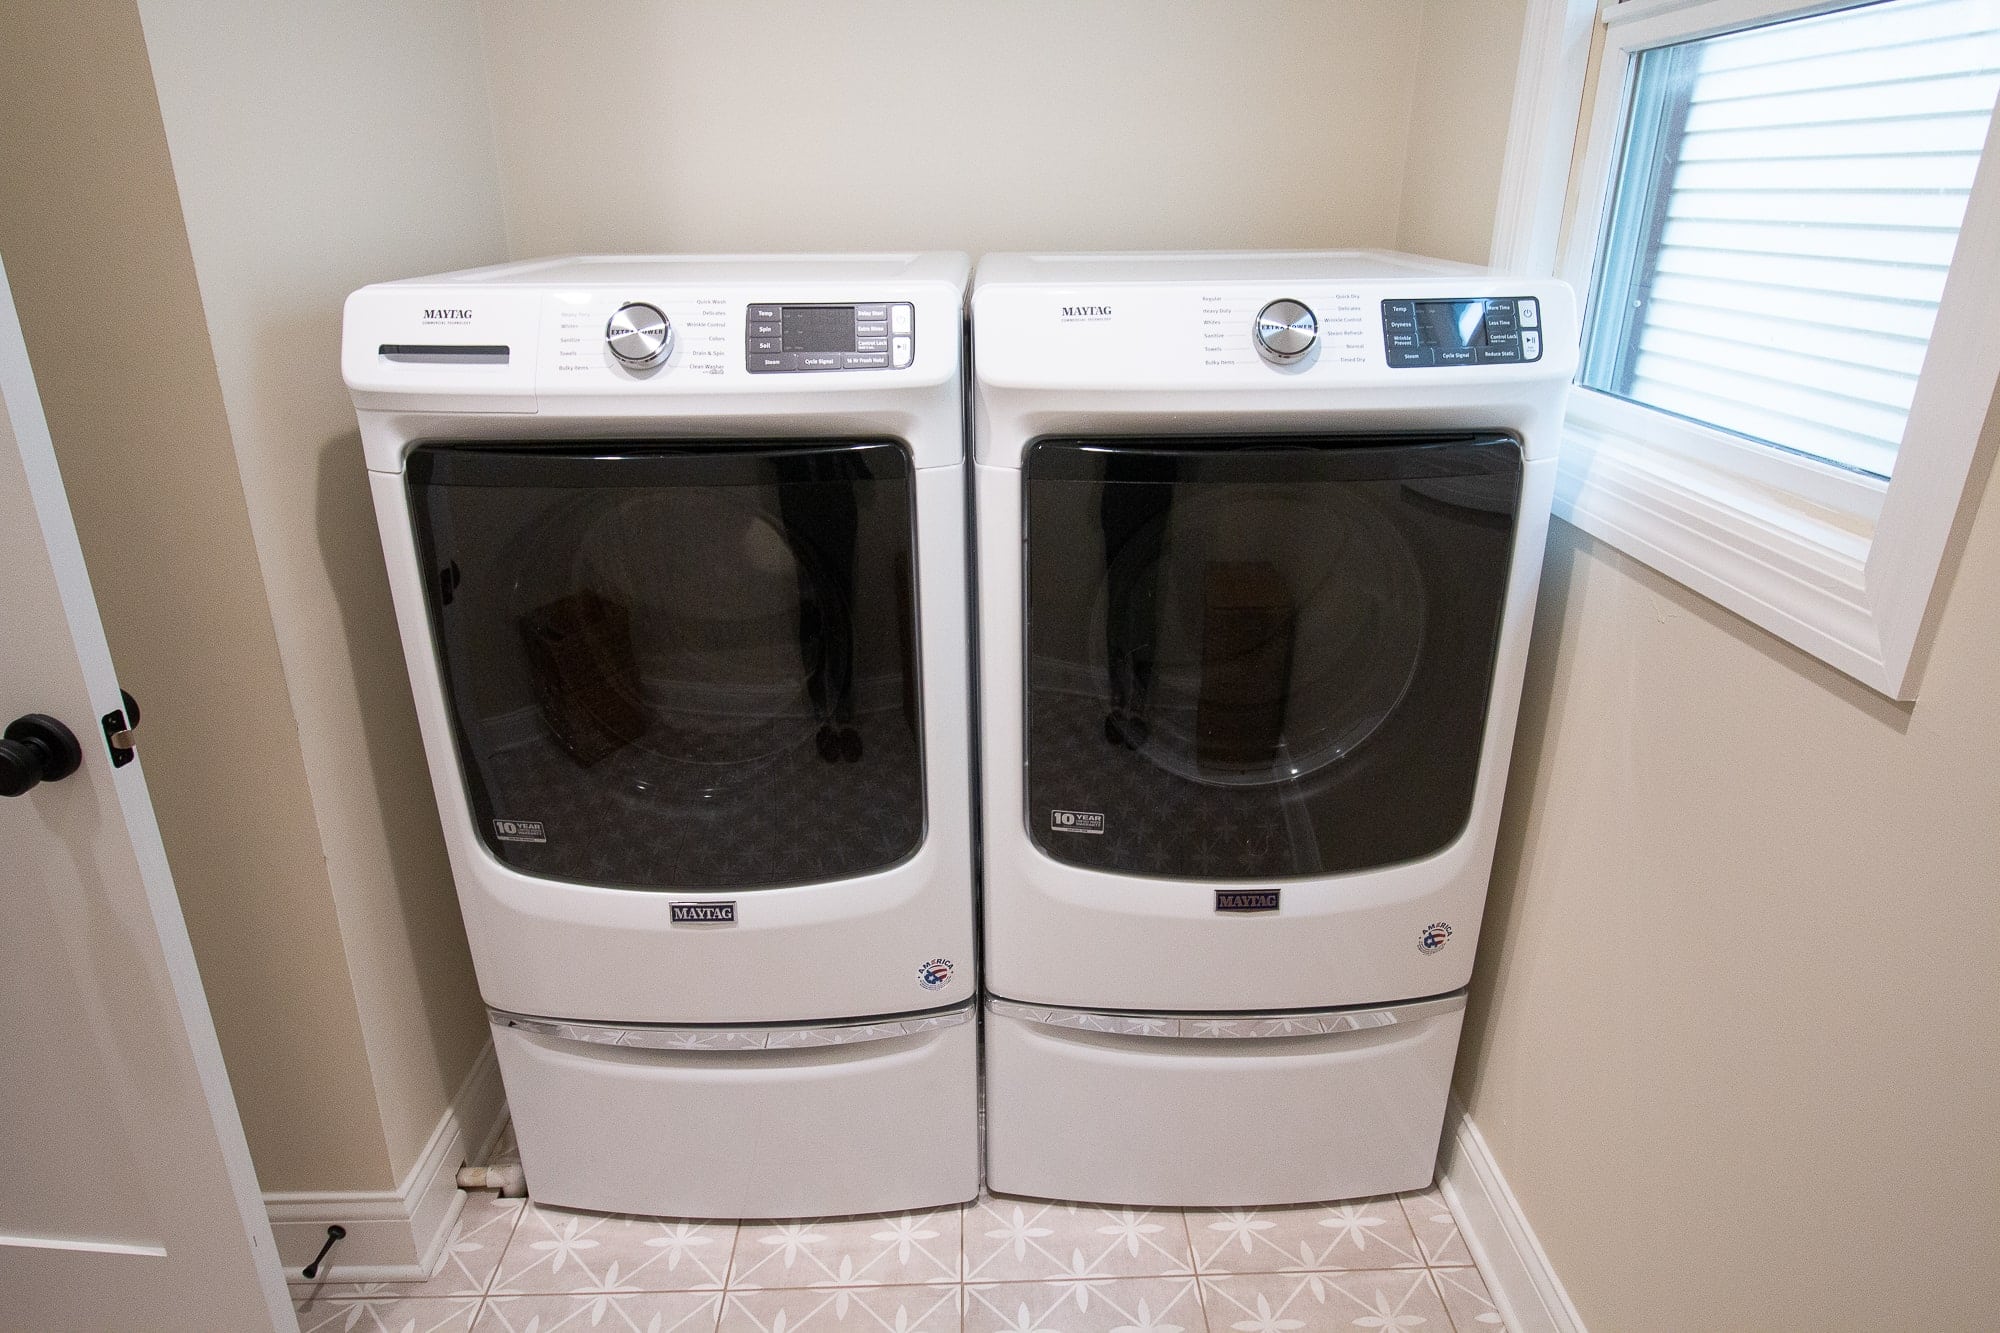 Our new washer and dryer